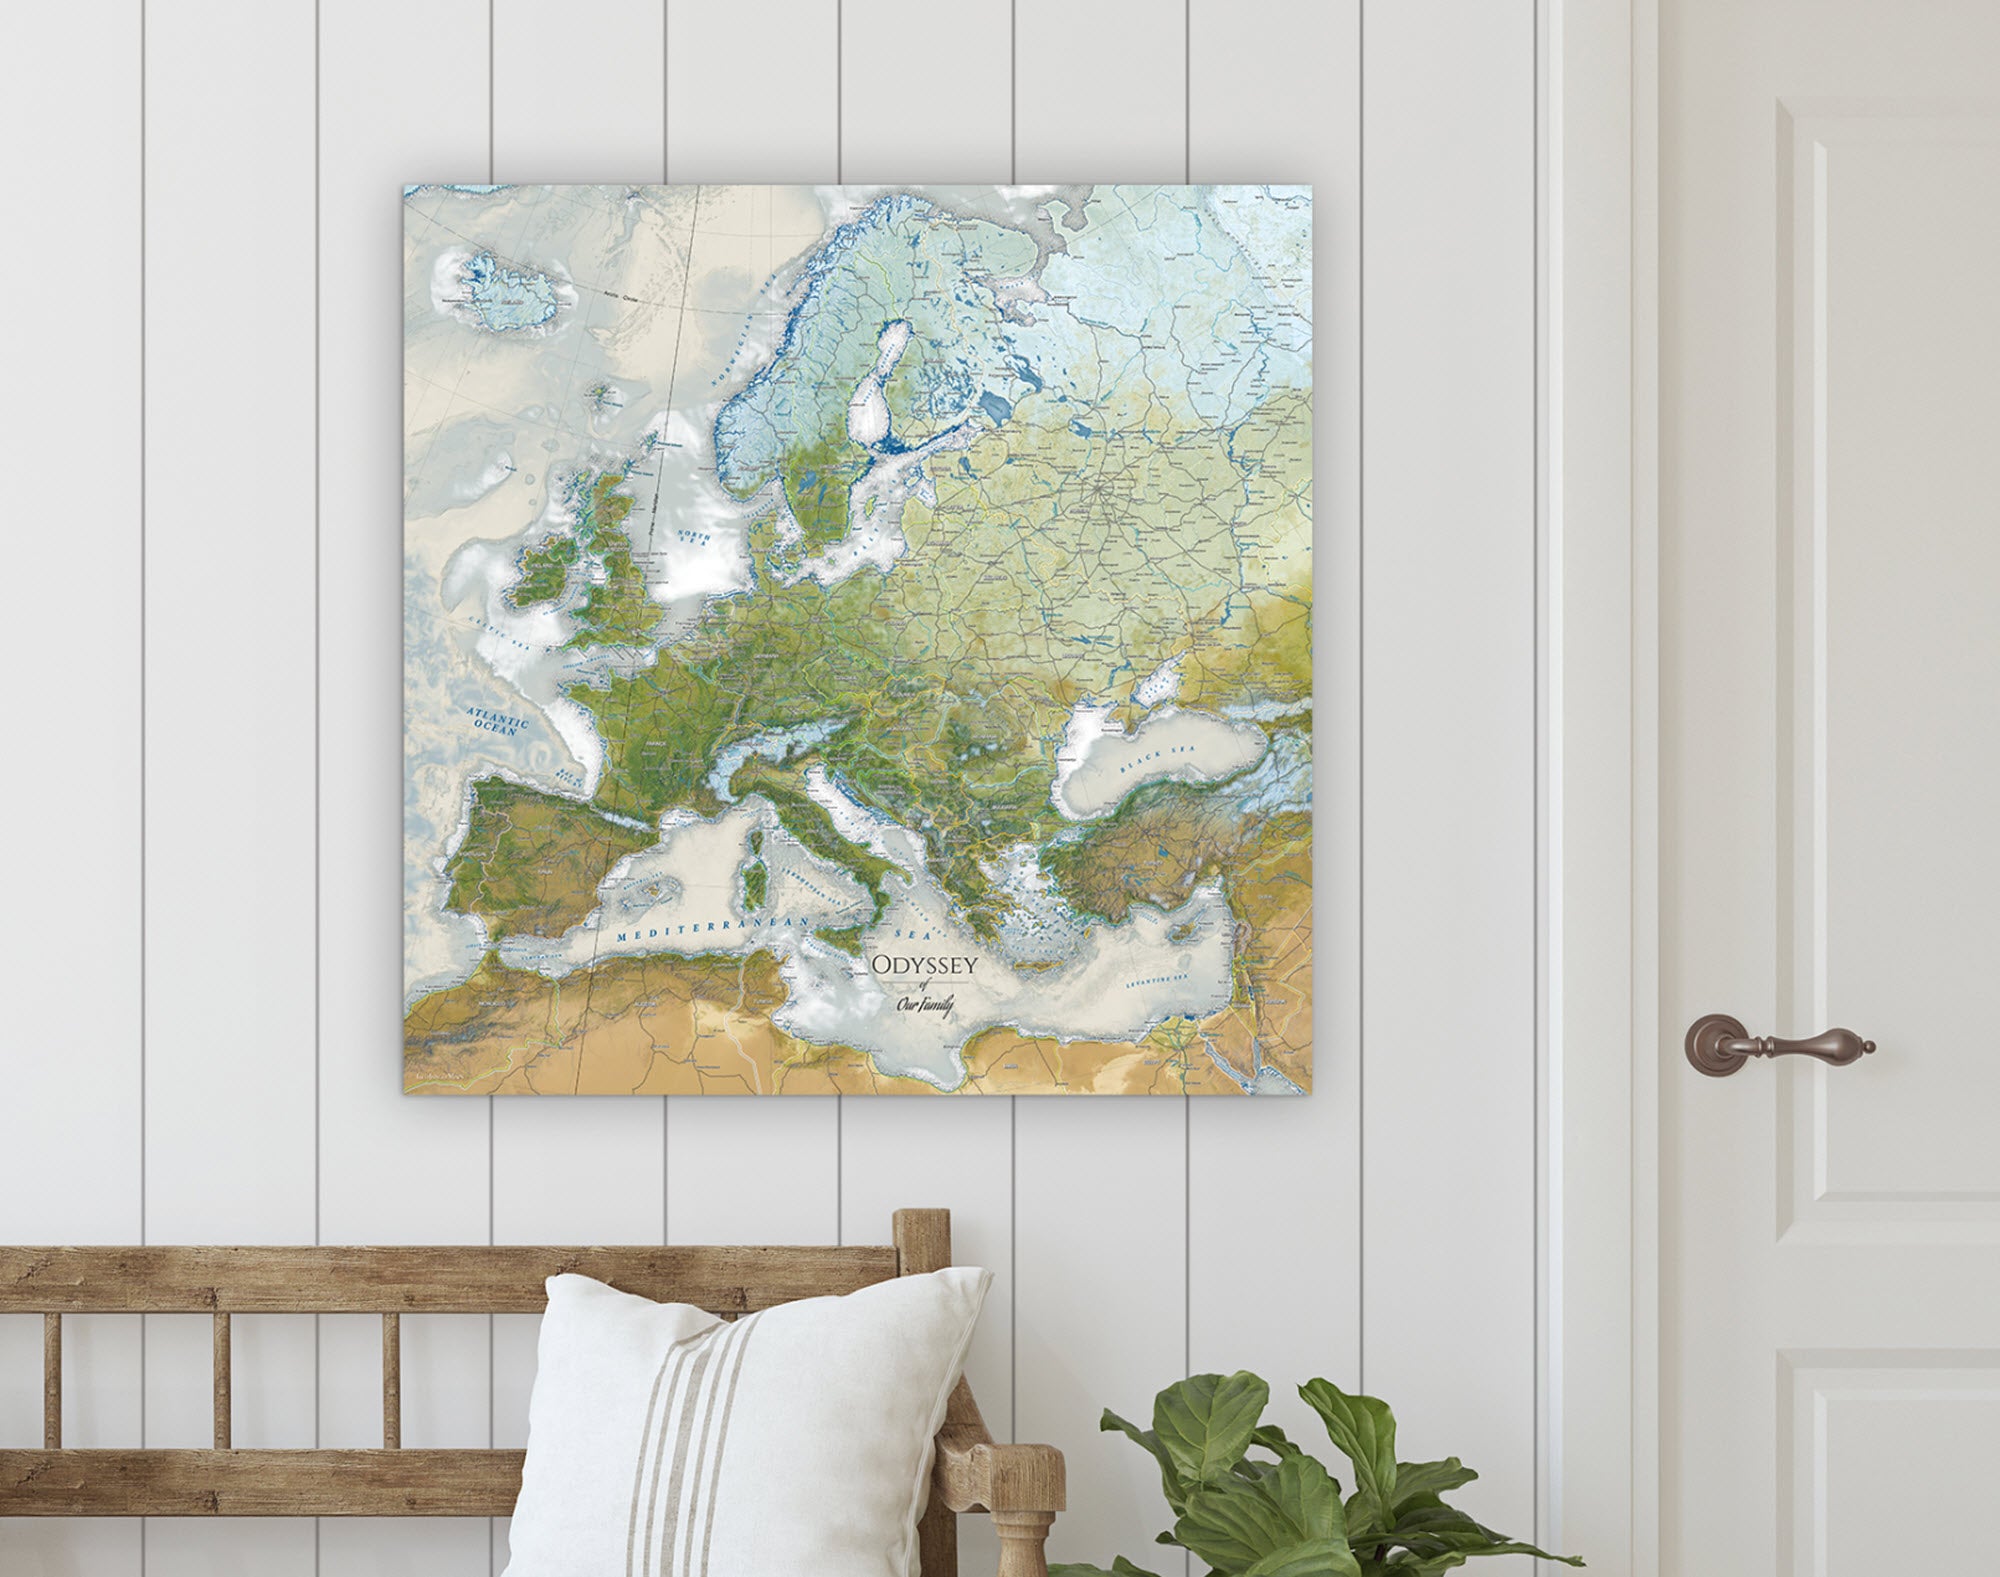 World Map Push Pin Board - The Nautilus World Map with Detailed Cities,  Terrain and Oceanography - Track Your Travels - Large Framed Map - 500 Pins